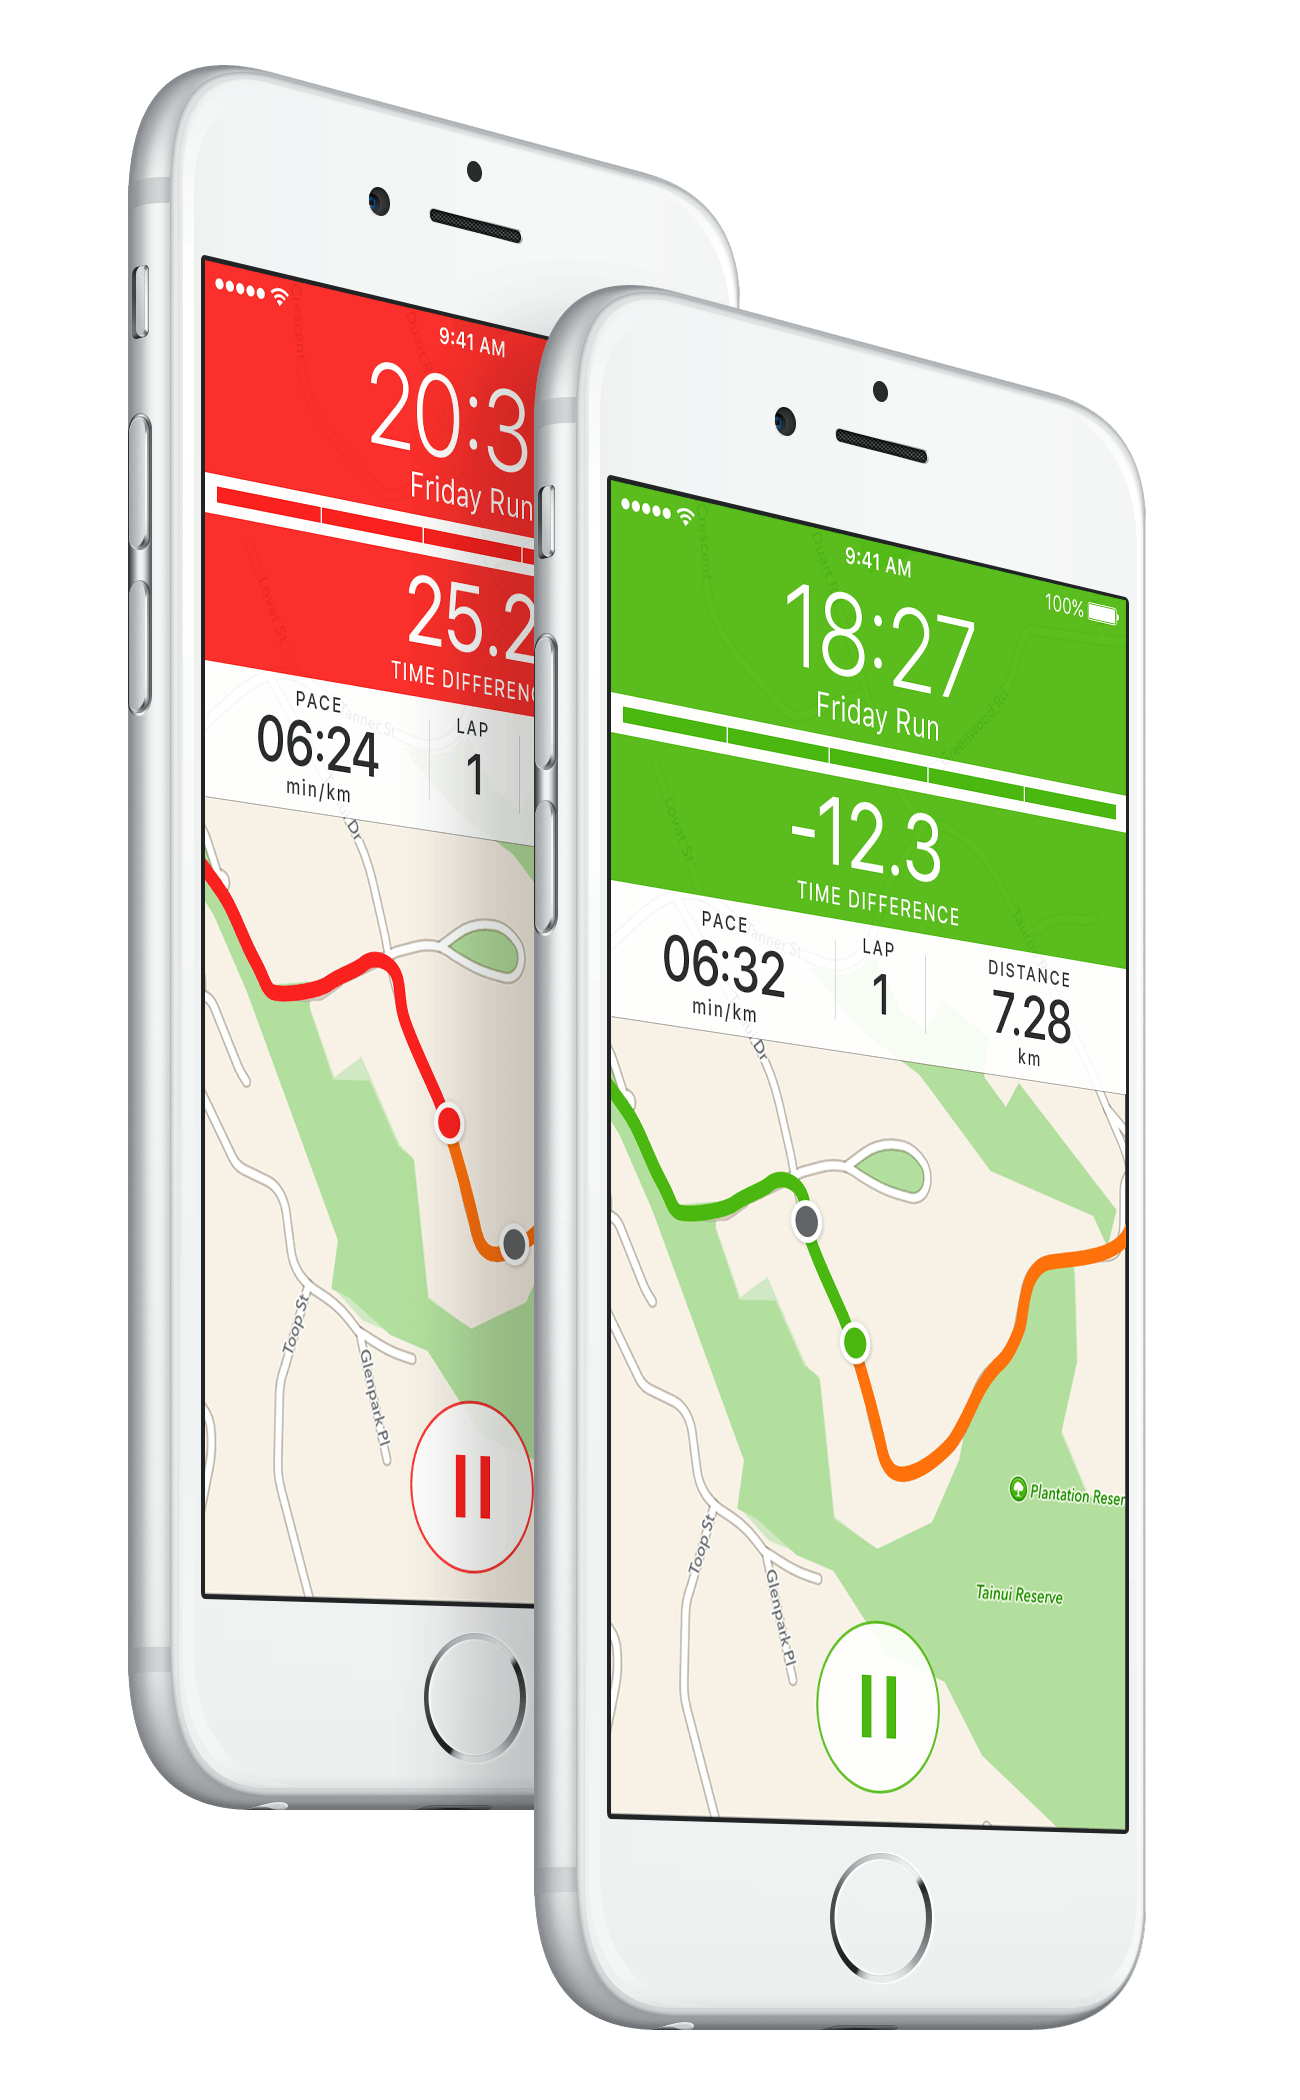 Two iPhones running Splits Trainer. One in red showing the user is behind and the other in green showing the user is ahead.